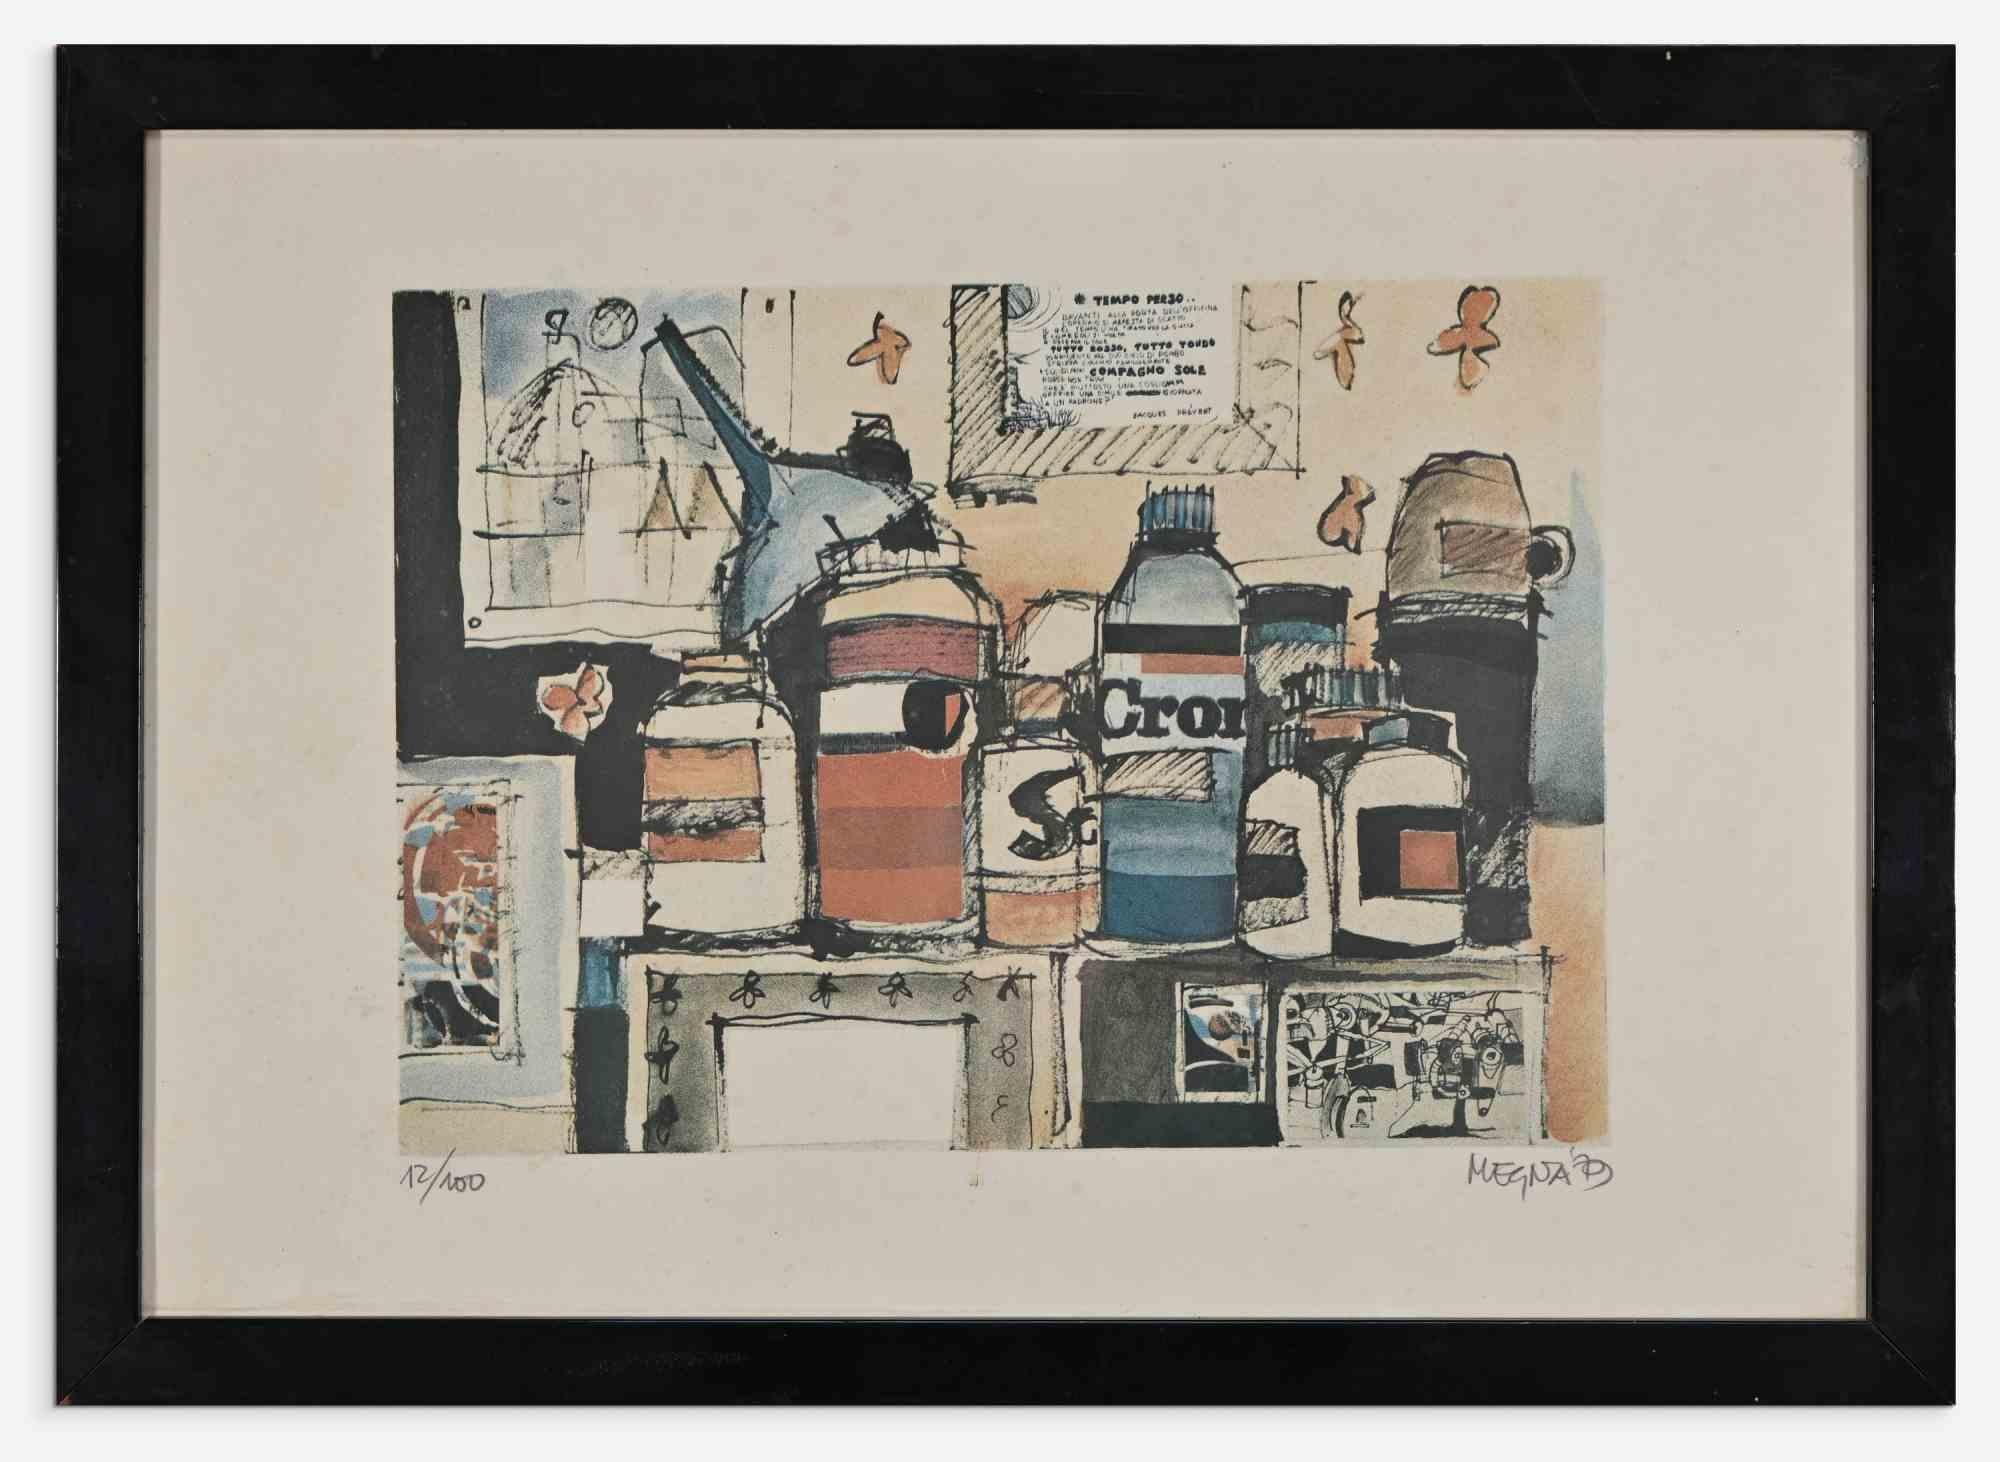 Still life is a lithograph realized by Giuseppe Megna in 1979. 

39x54 cm.

Edition numbered 12/100. 

Hand-signed in pencil in the lower right margin.

Good conditions.